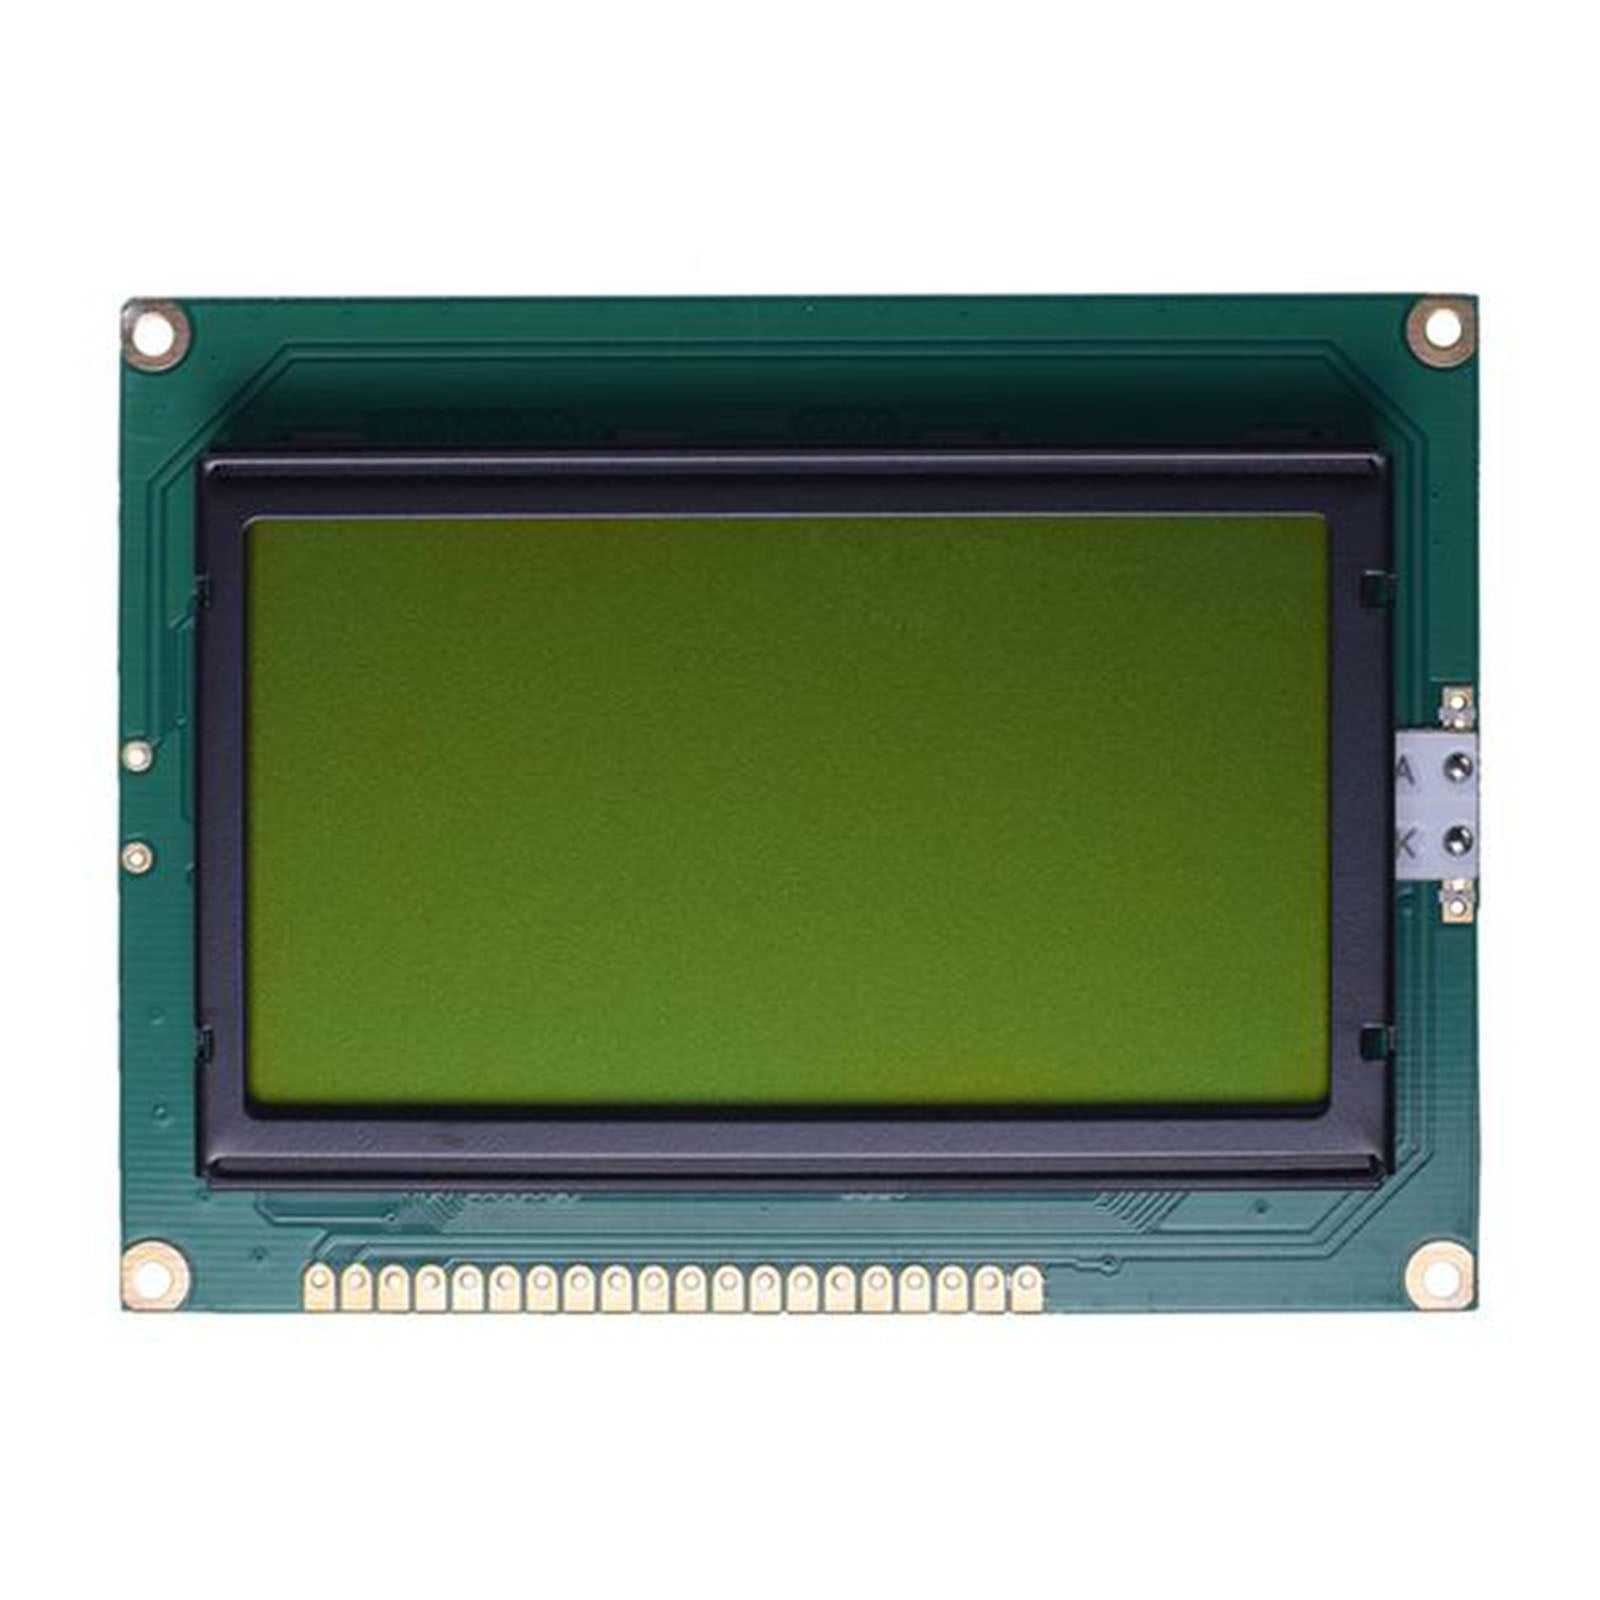 Large 128x64 LCD 3.24 inch graphic green display module with MCU interface